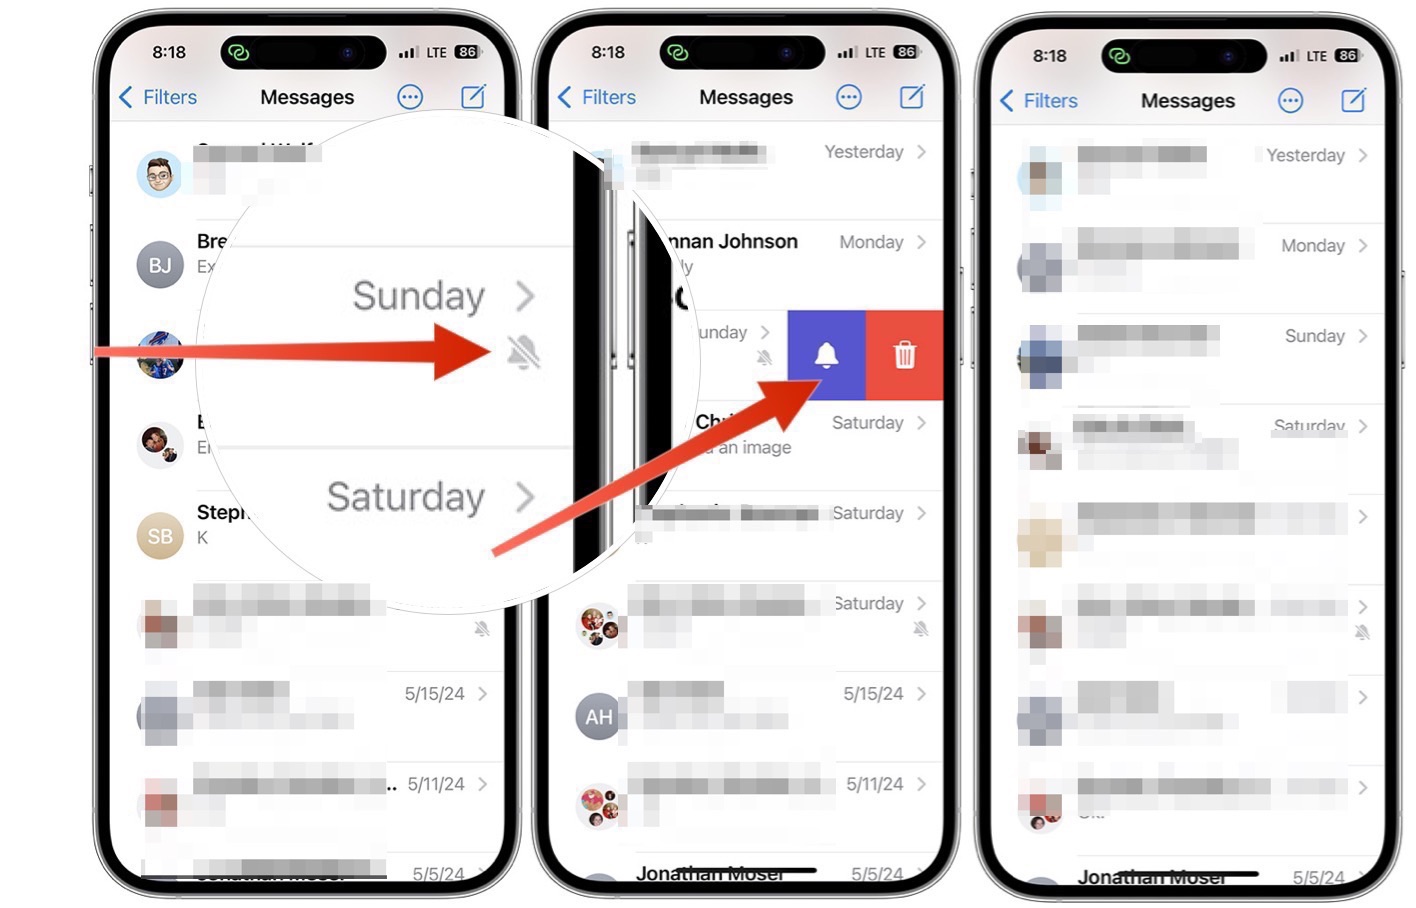 Screenshots showing how to unmute a conversation on the Messages app for iPhone.